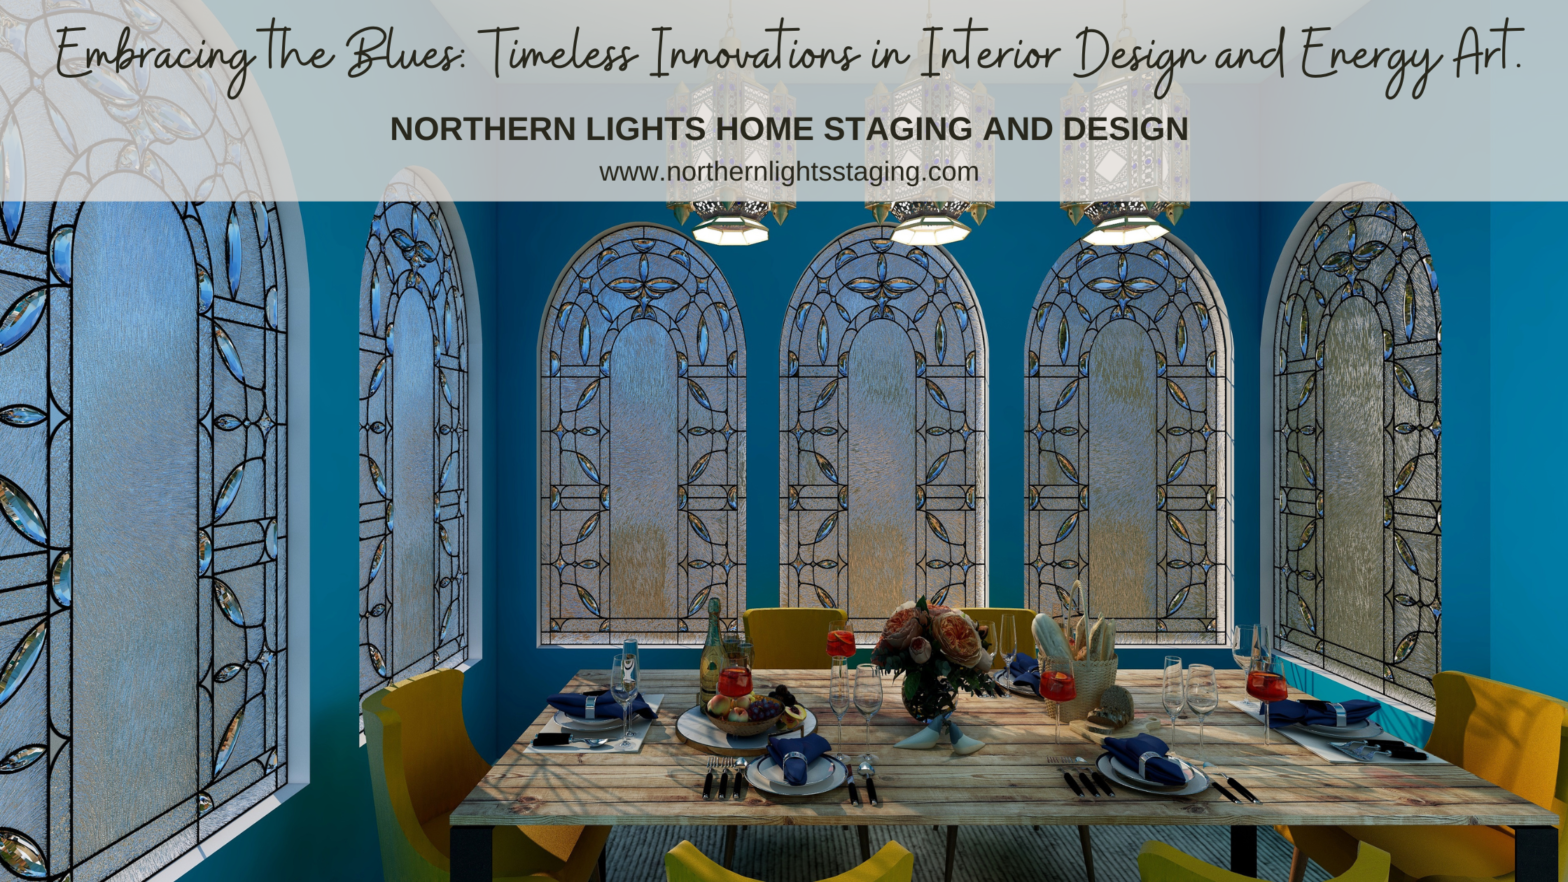 Embracing the Blues: Timeless Innovations in Interior Design and Energy Art.